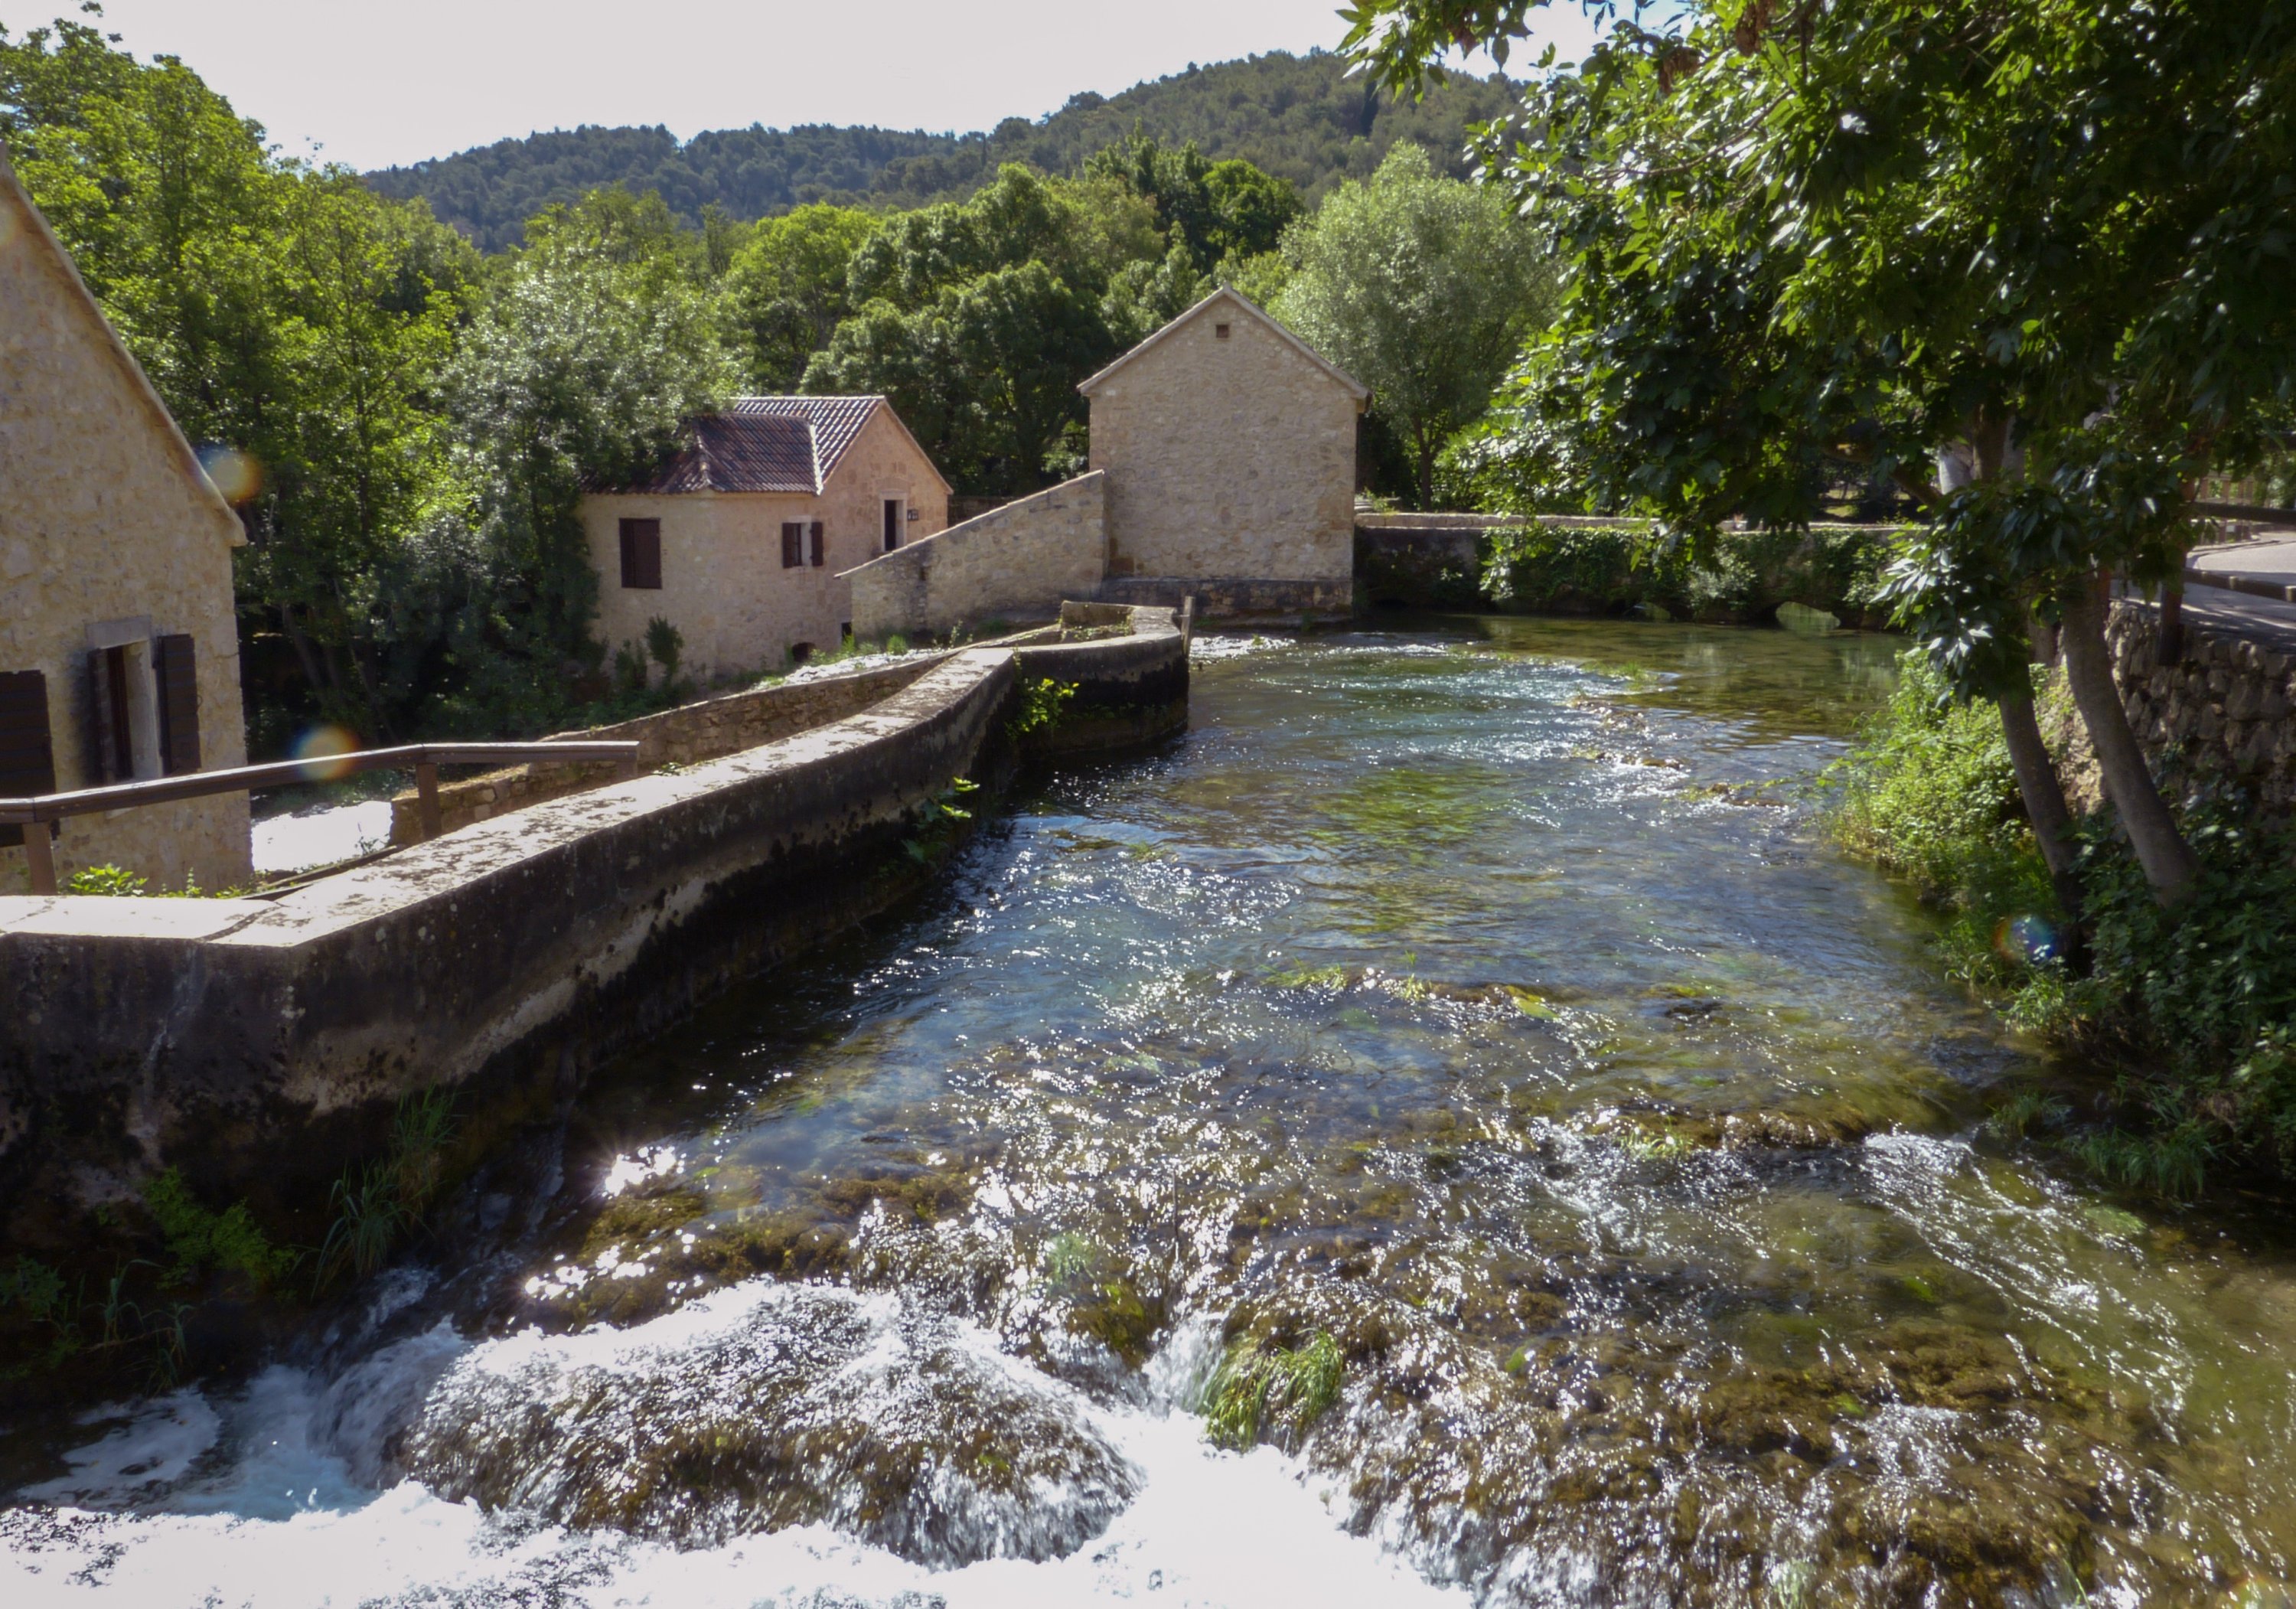 Old mills and forges line the banks of the Krka River that runs through parts of Croatia. (Florian Sanktjohanser/dpa Photo) 